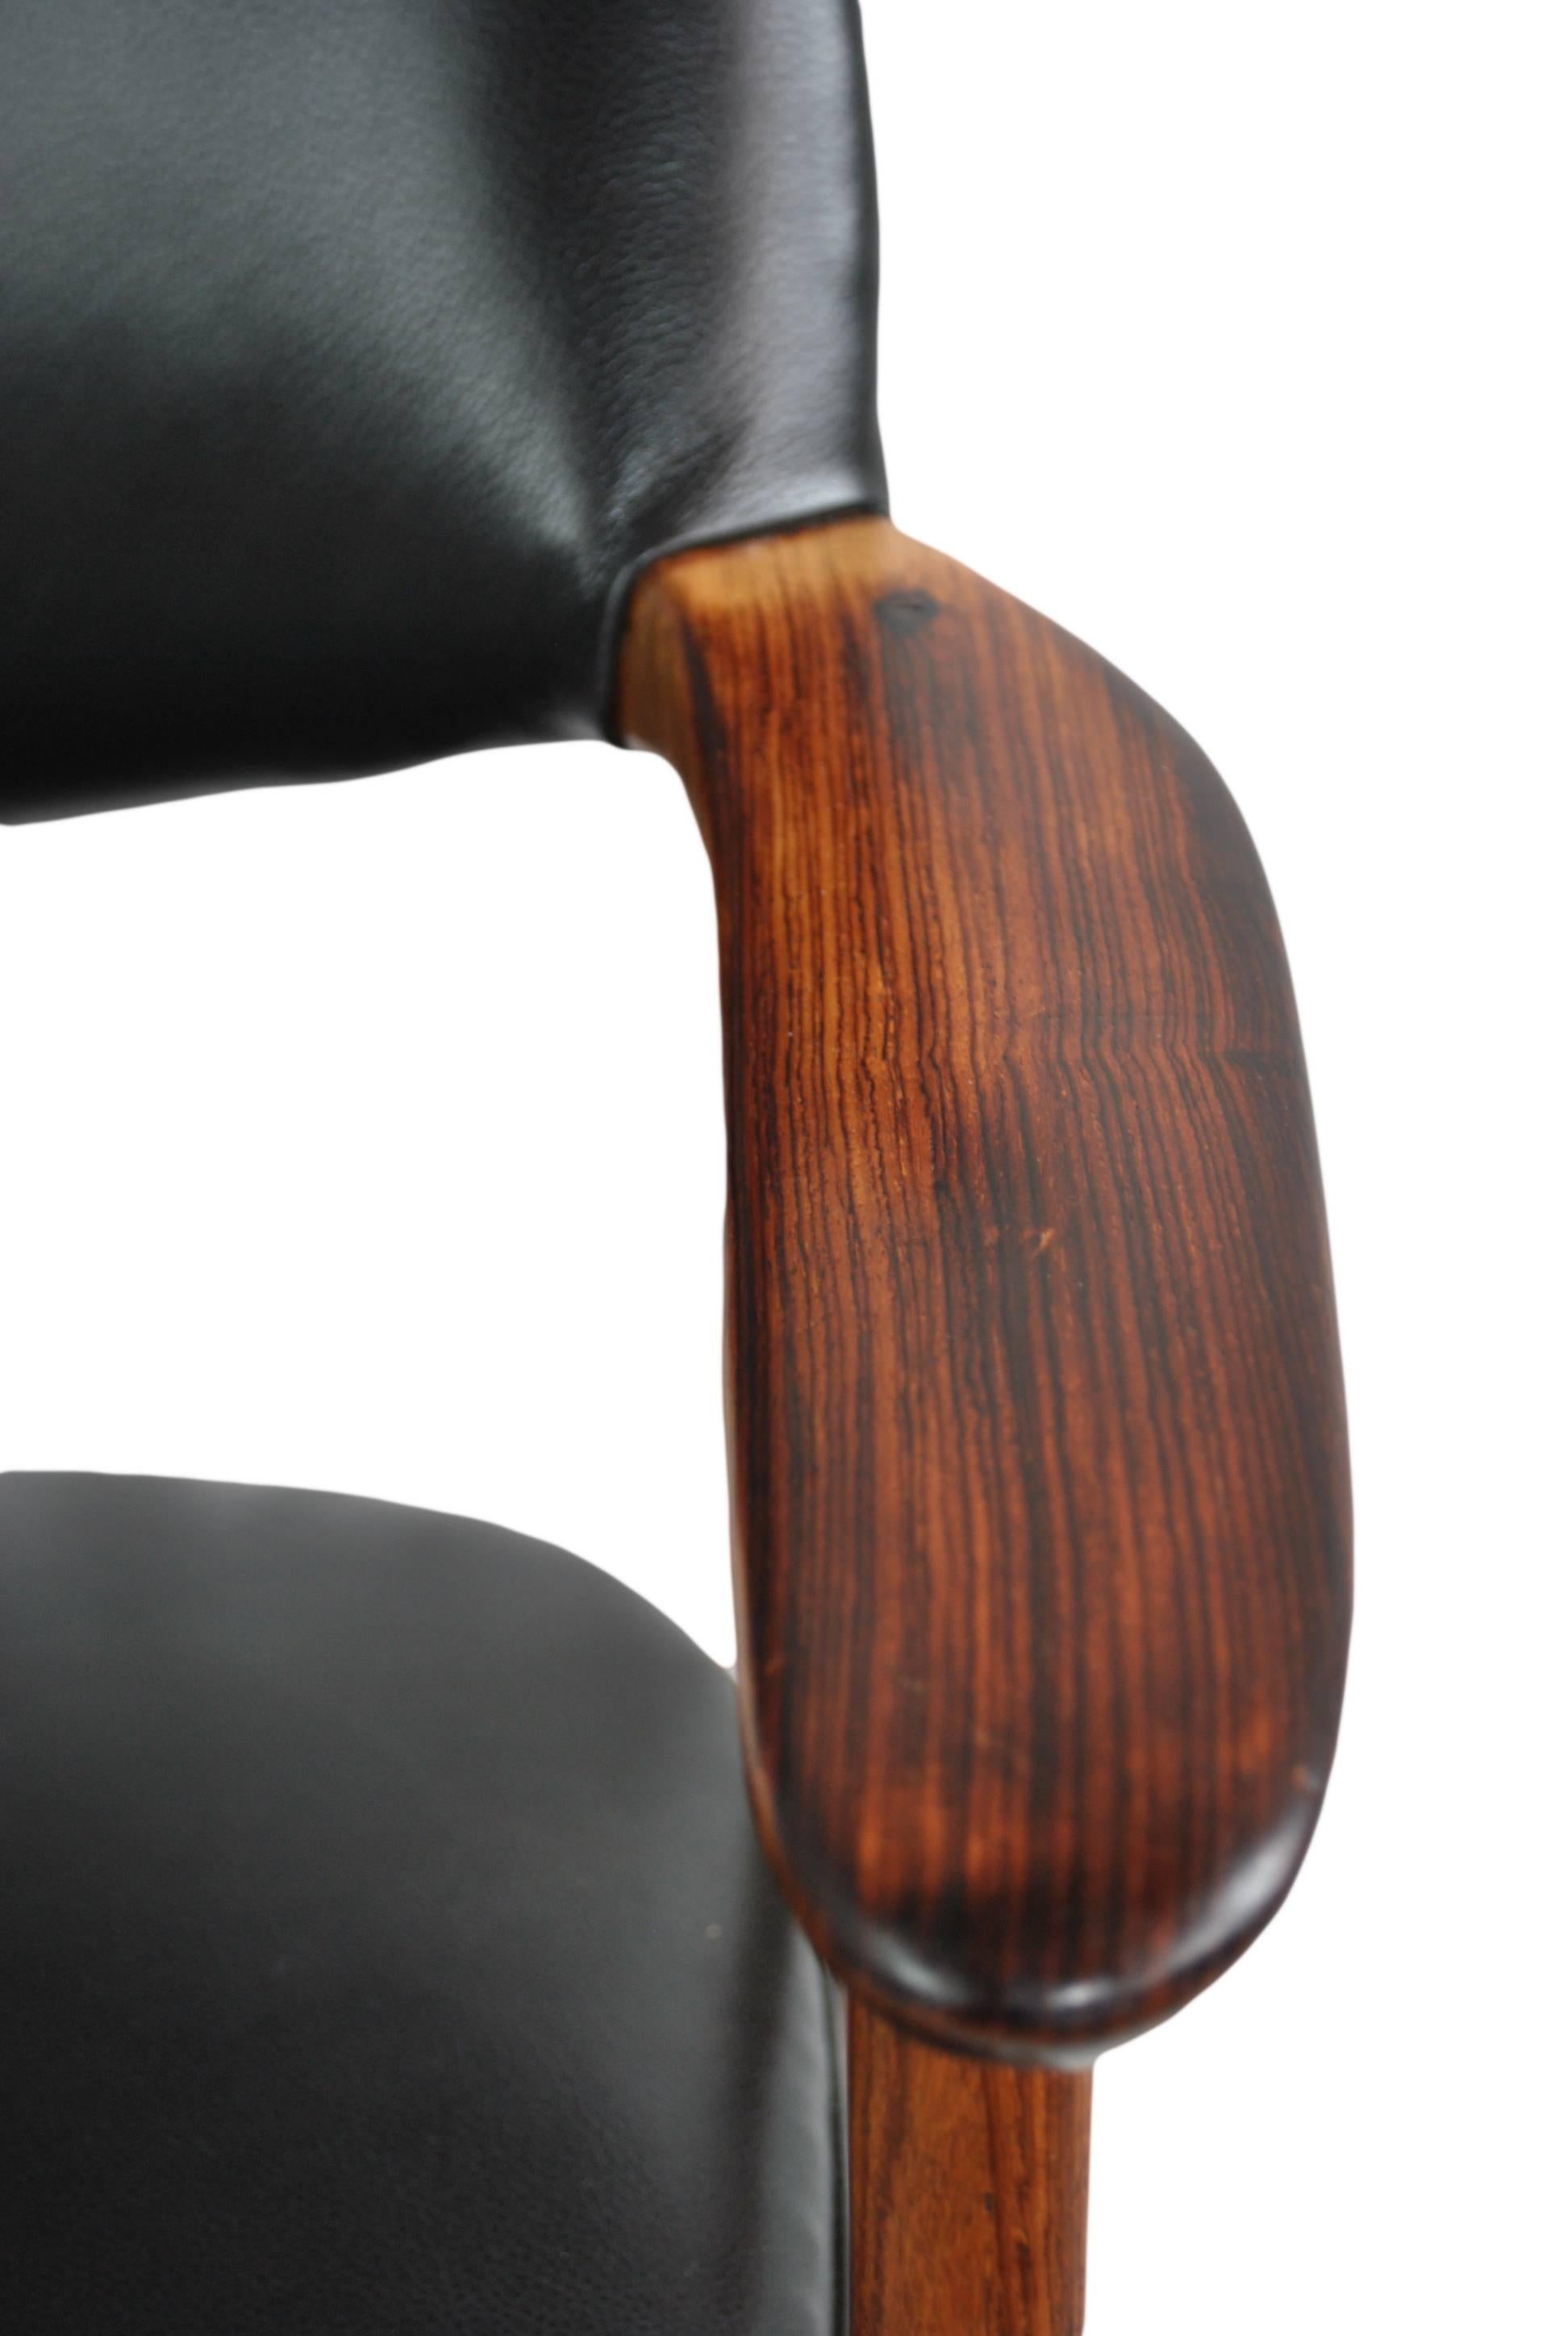 Fully restored and reupholstered chairs in rosewood and black anthracite crest leather. Very well grained light rosewood.
Super comfort desk or occasional chairs designed by Erik Kirkegaard for Hong-Stole, Denmark, circa late 1950s.
More available